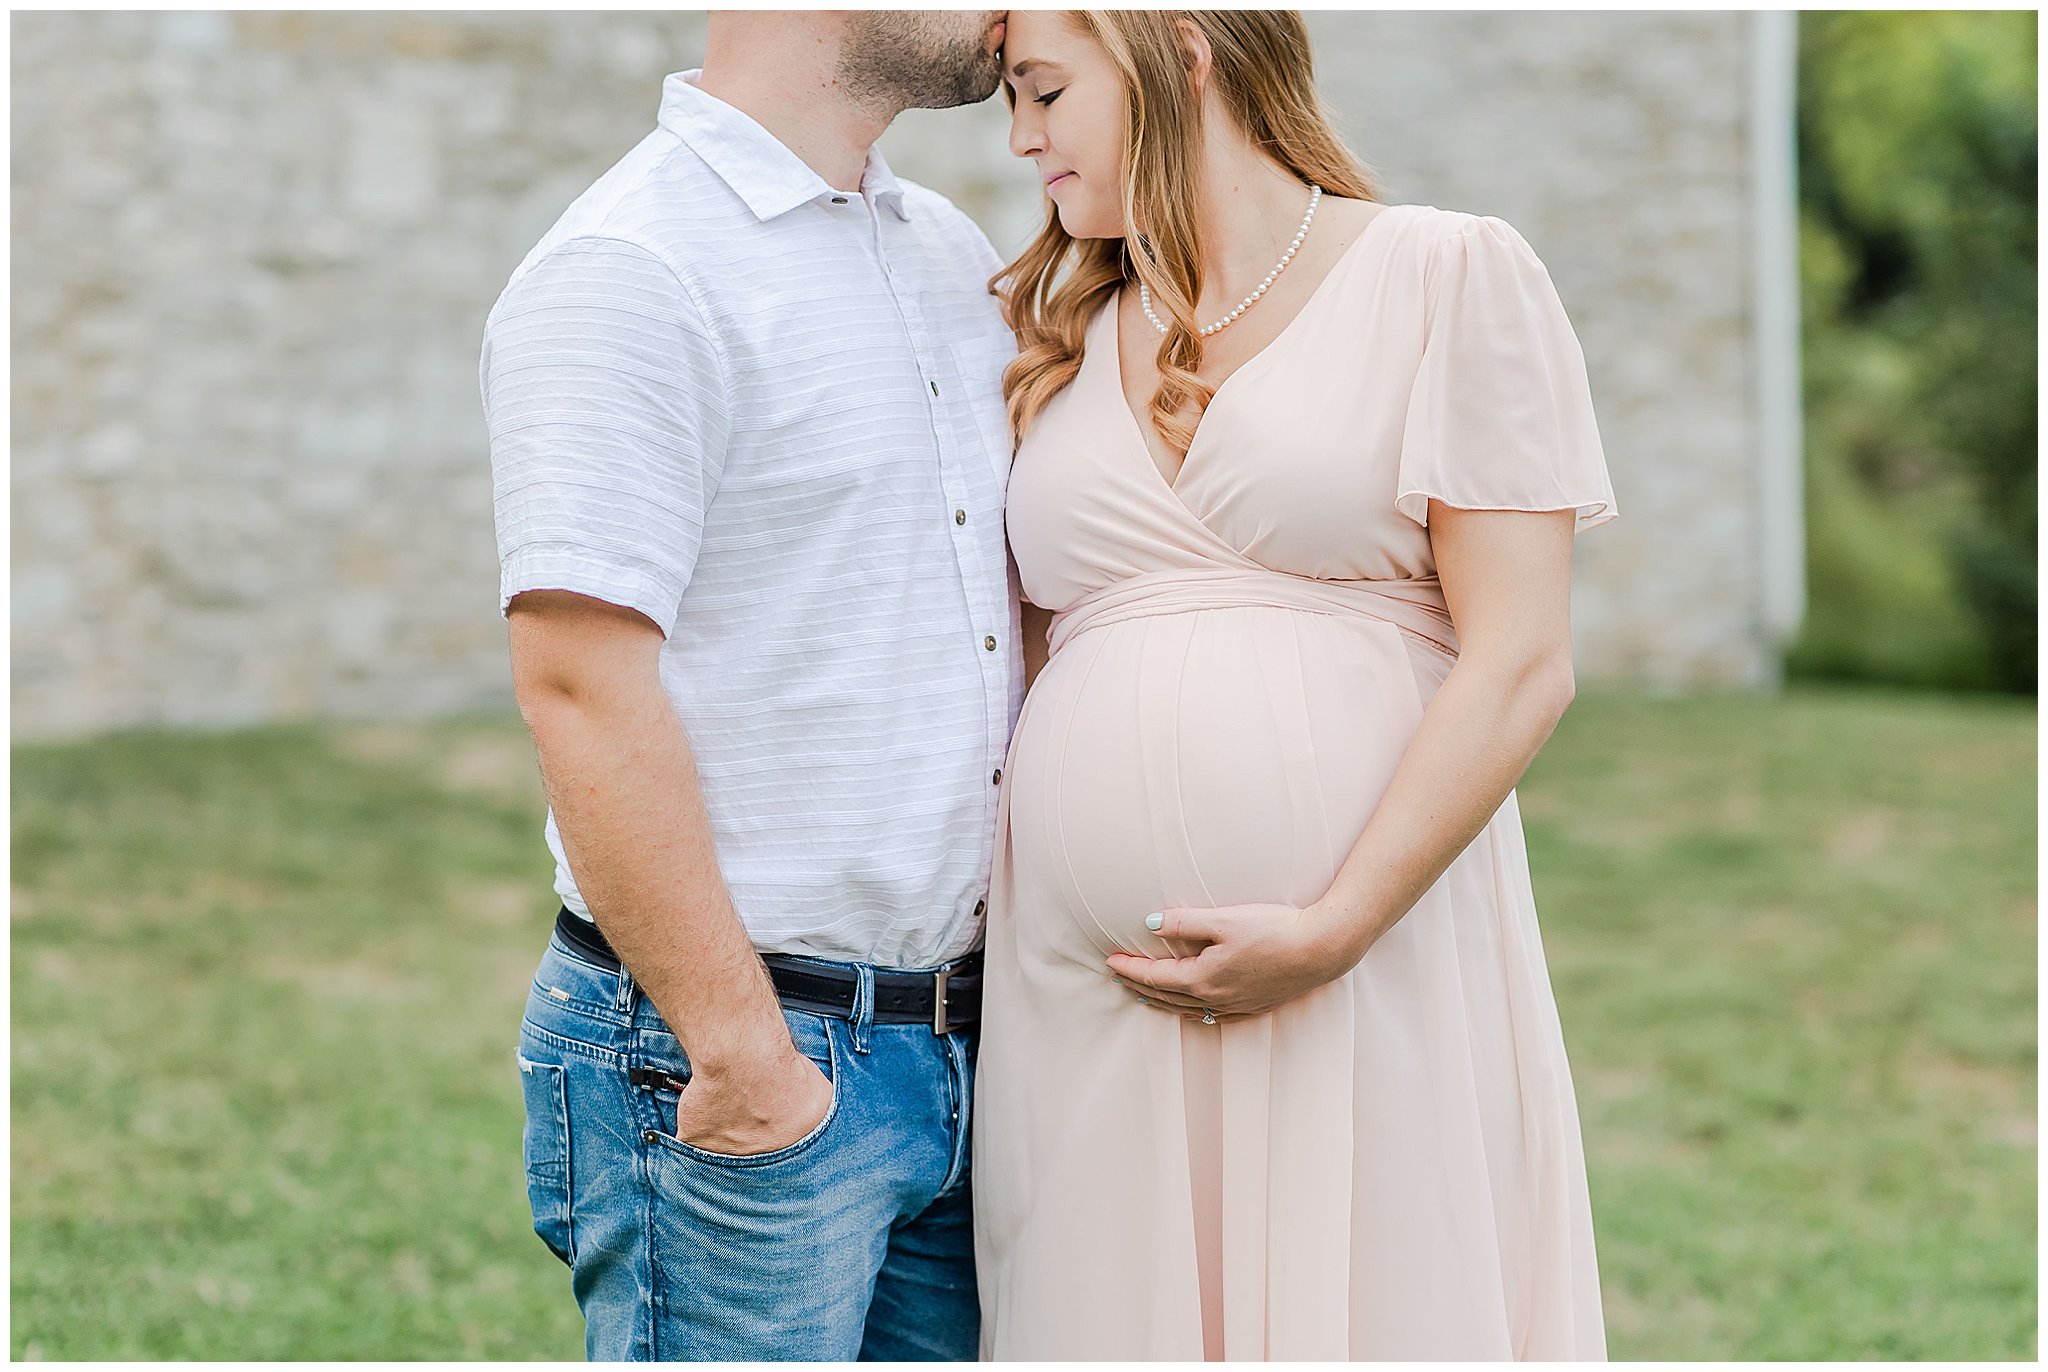 Grings Mill Maternity Session | Gring's Mill Maternity Session | Reading PA | Wyomissing PA | Maternity Session | Maternity Session Posing